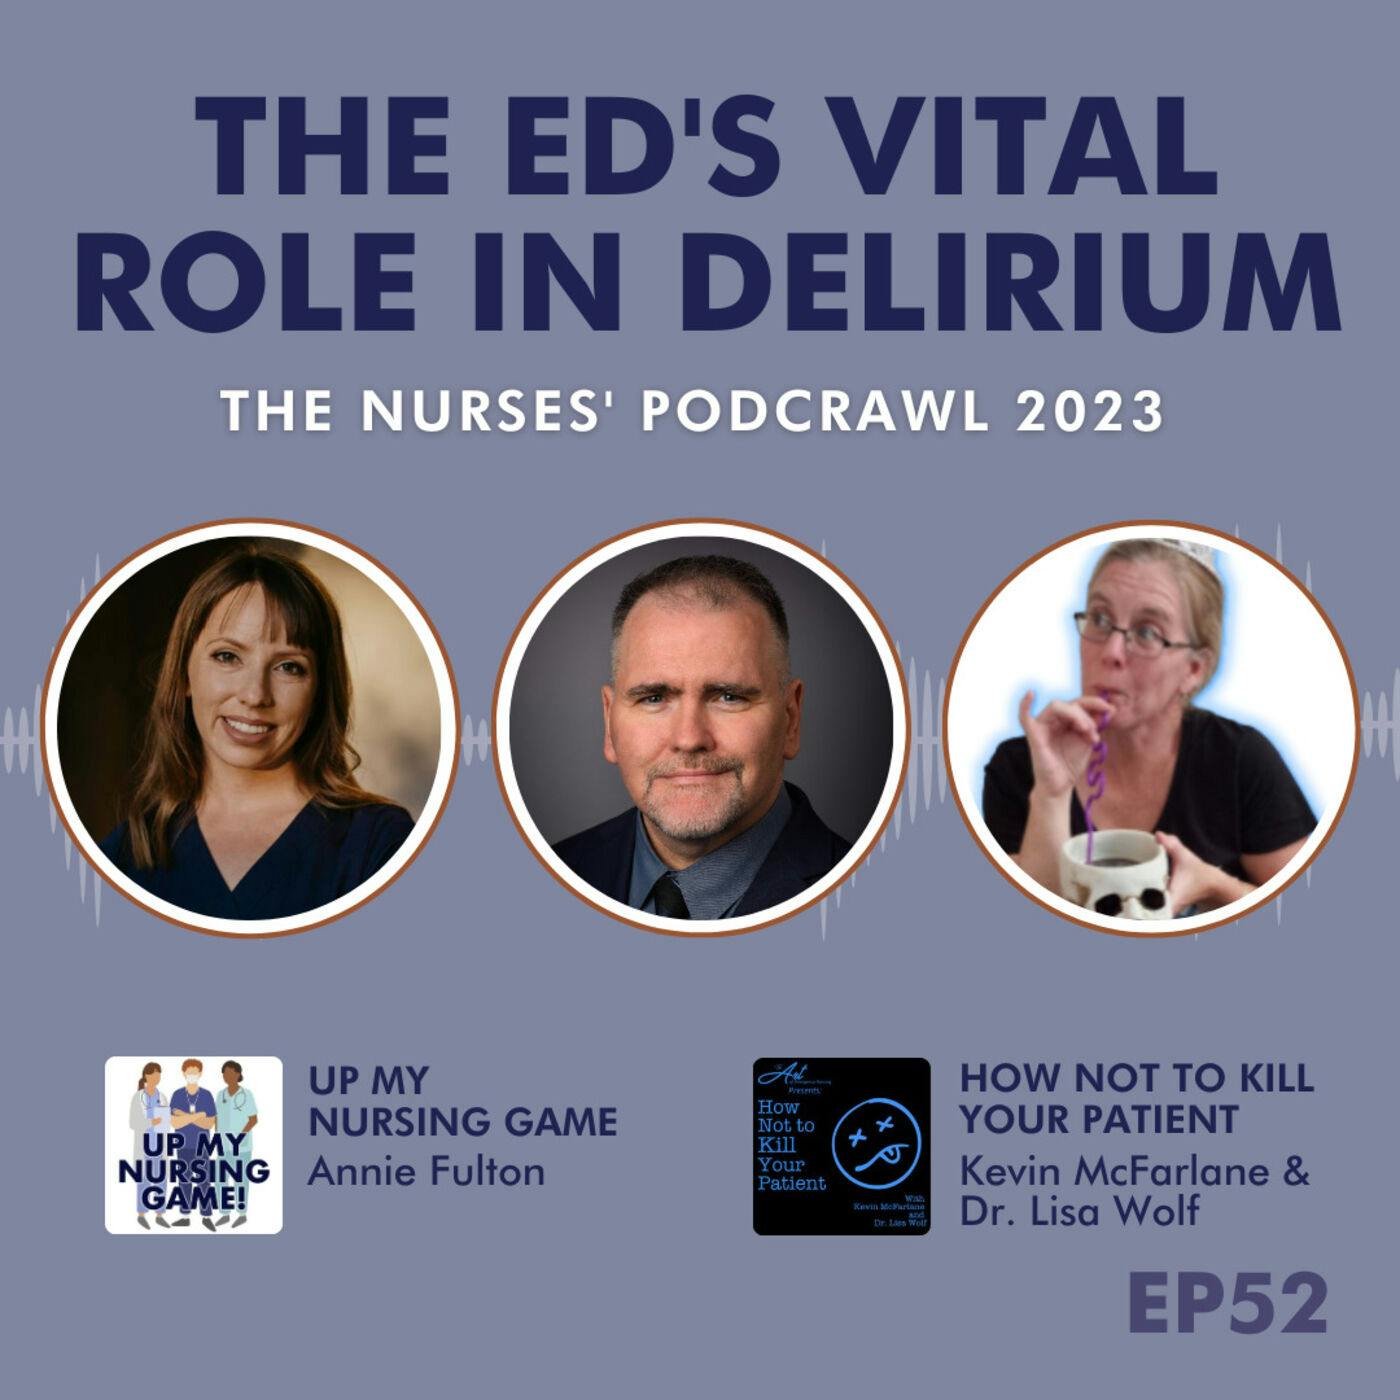 The ED’s Vital Role in Delirium: Insights for All Nurses with Kevin and Lisa from the How Not to Kill Your Patient Podcast